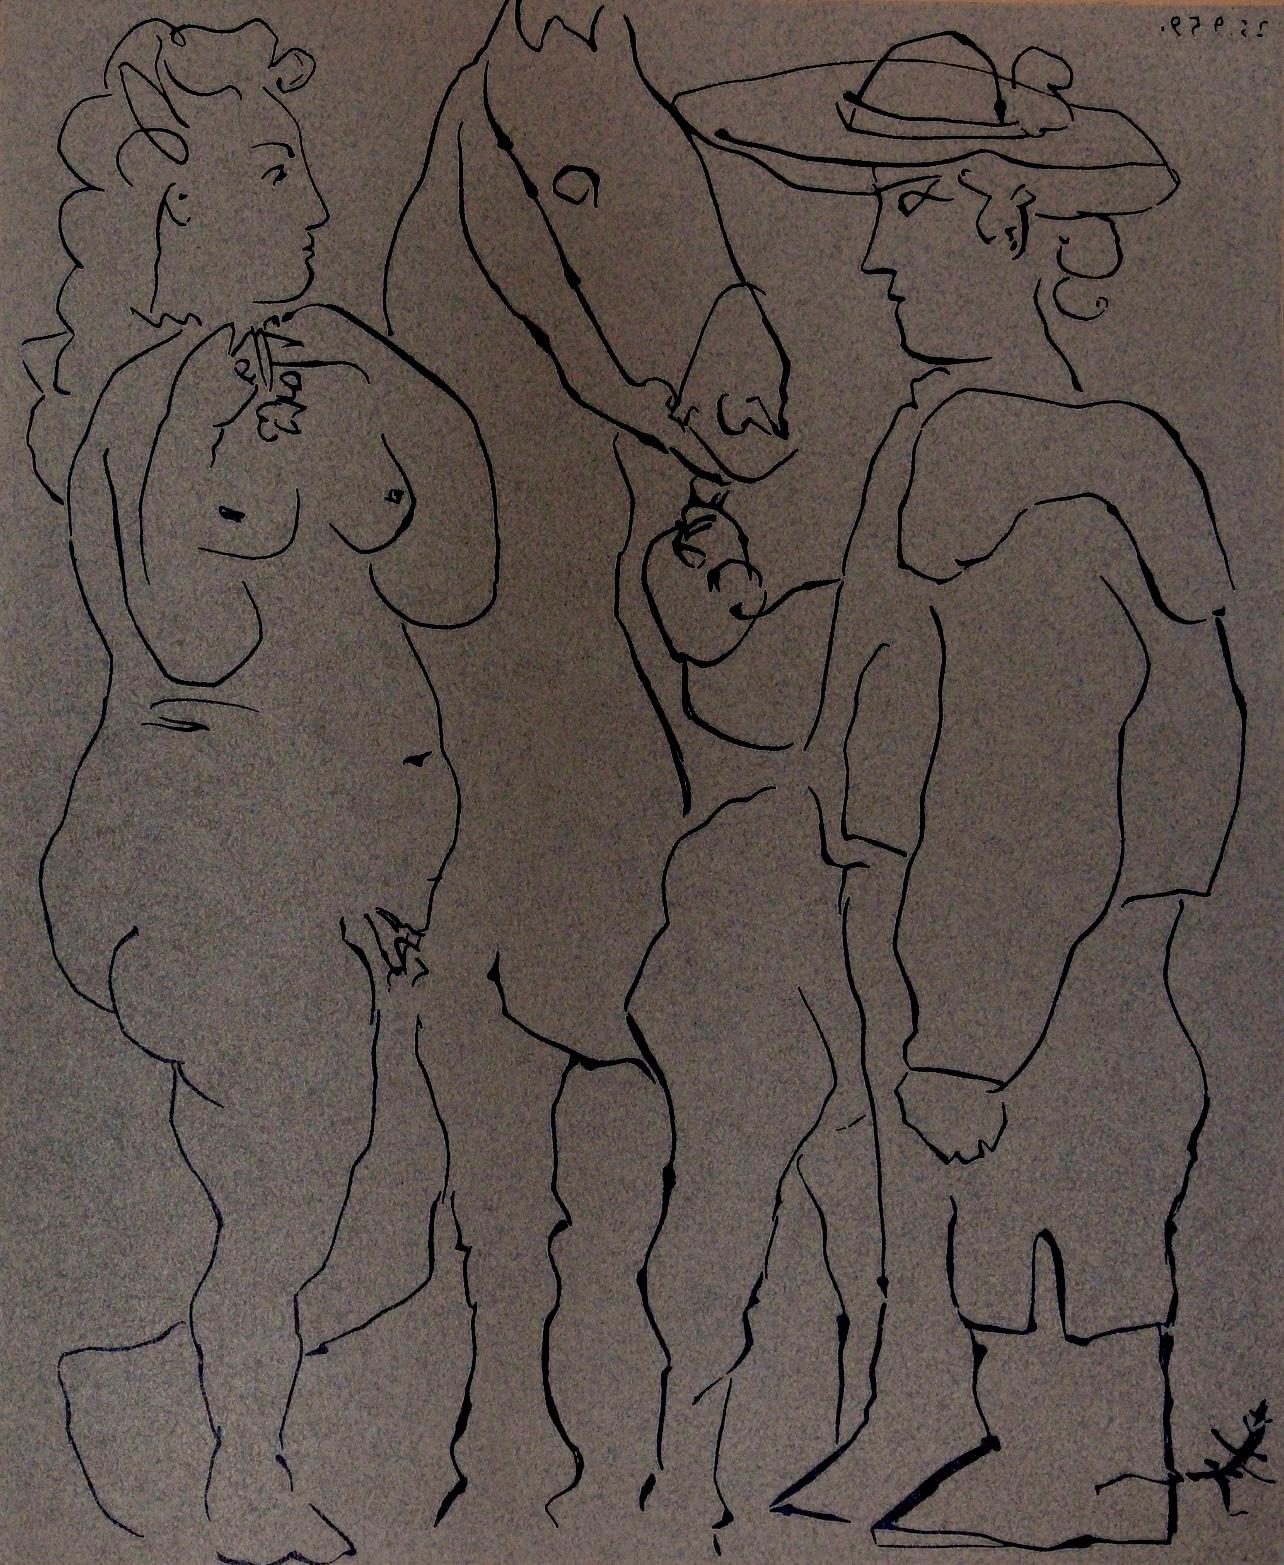 Linocut on archival paper. Unsigned and unnumbered, as issued. Good condition. Notes: From the volume, Pablo Picasso: Linogravures. Published by France Éditions Cercle d'Art, Paris; printed by Verlag Gerd Hatje, Stuttgart, 1962. Excerpted from the